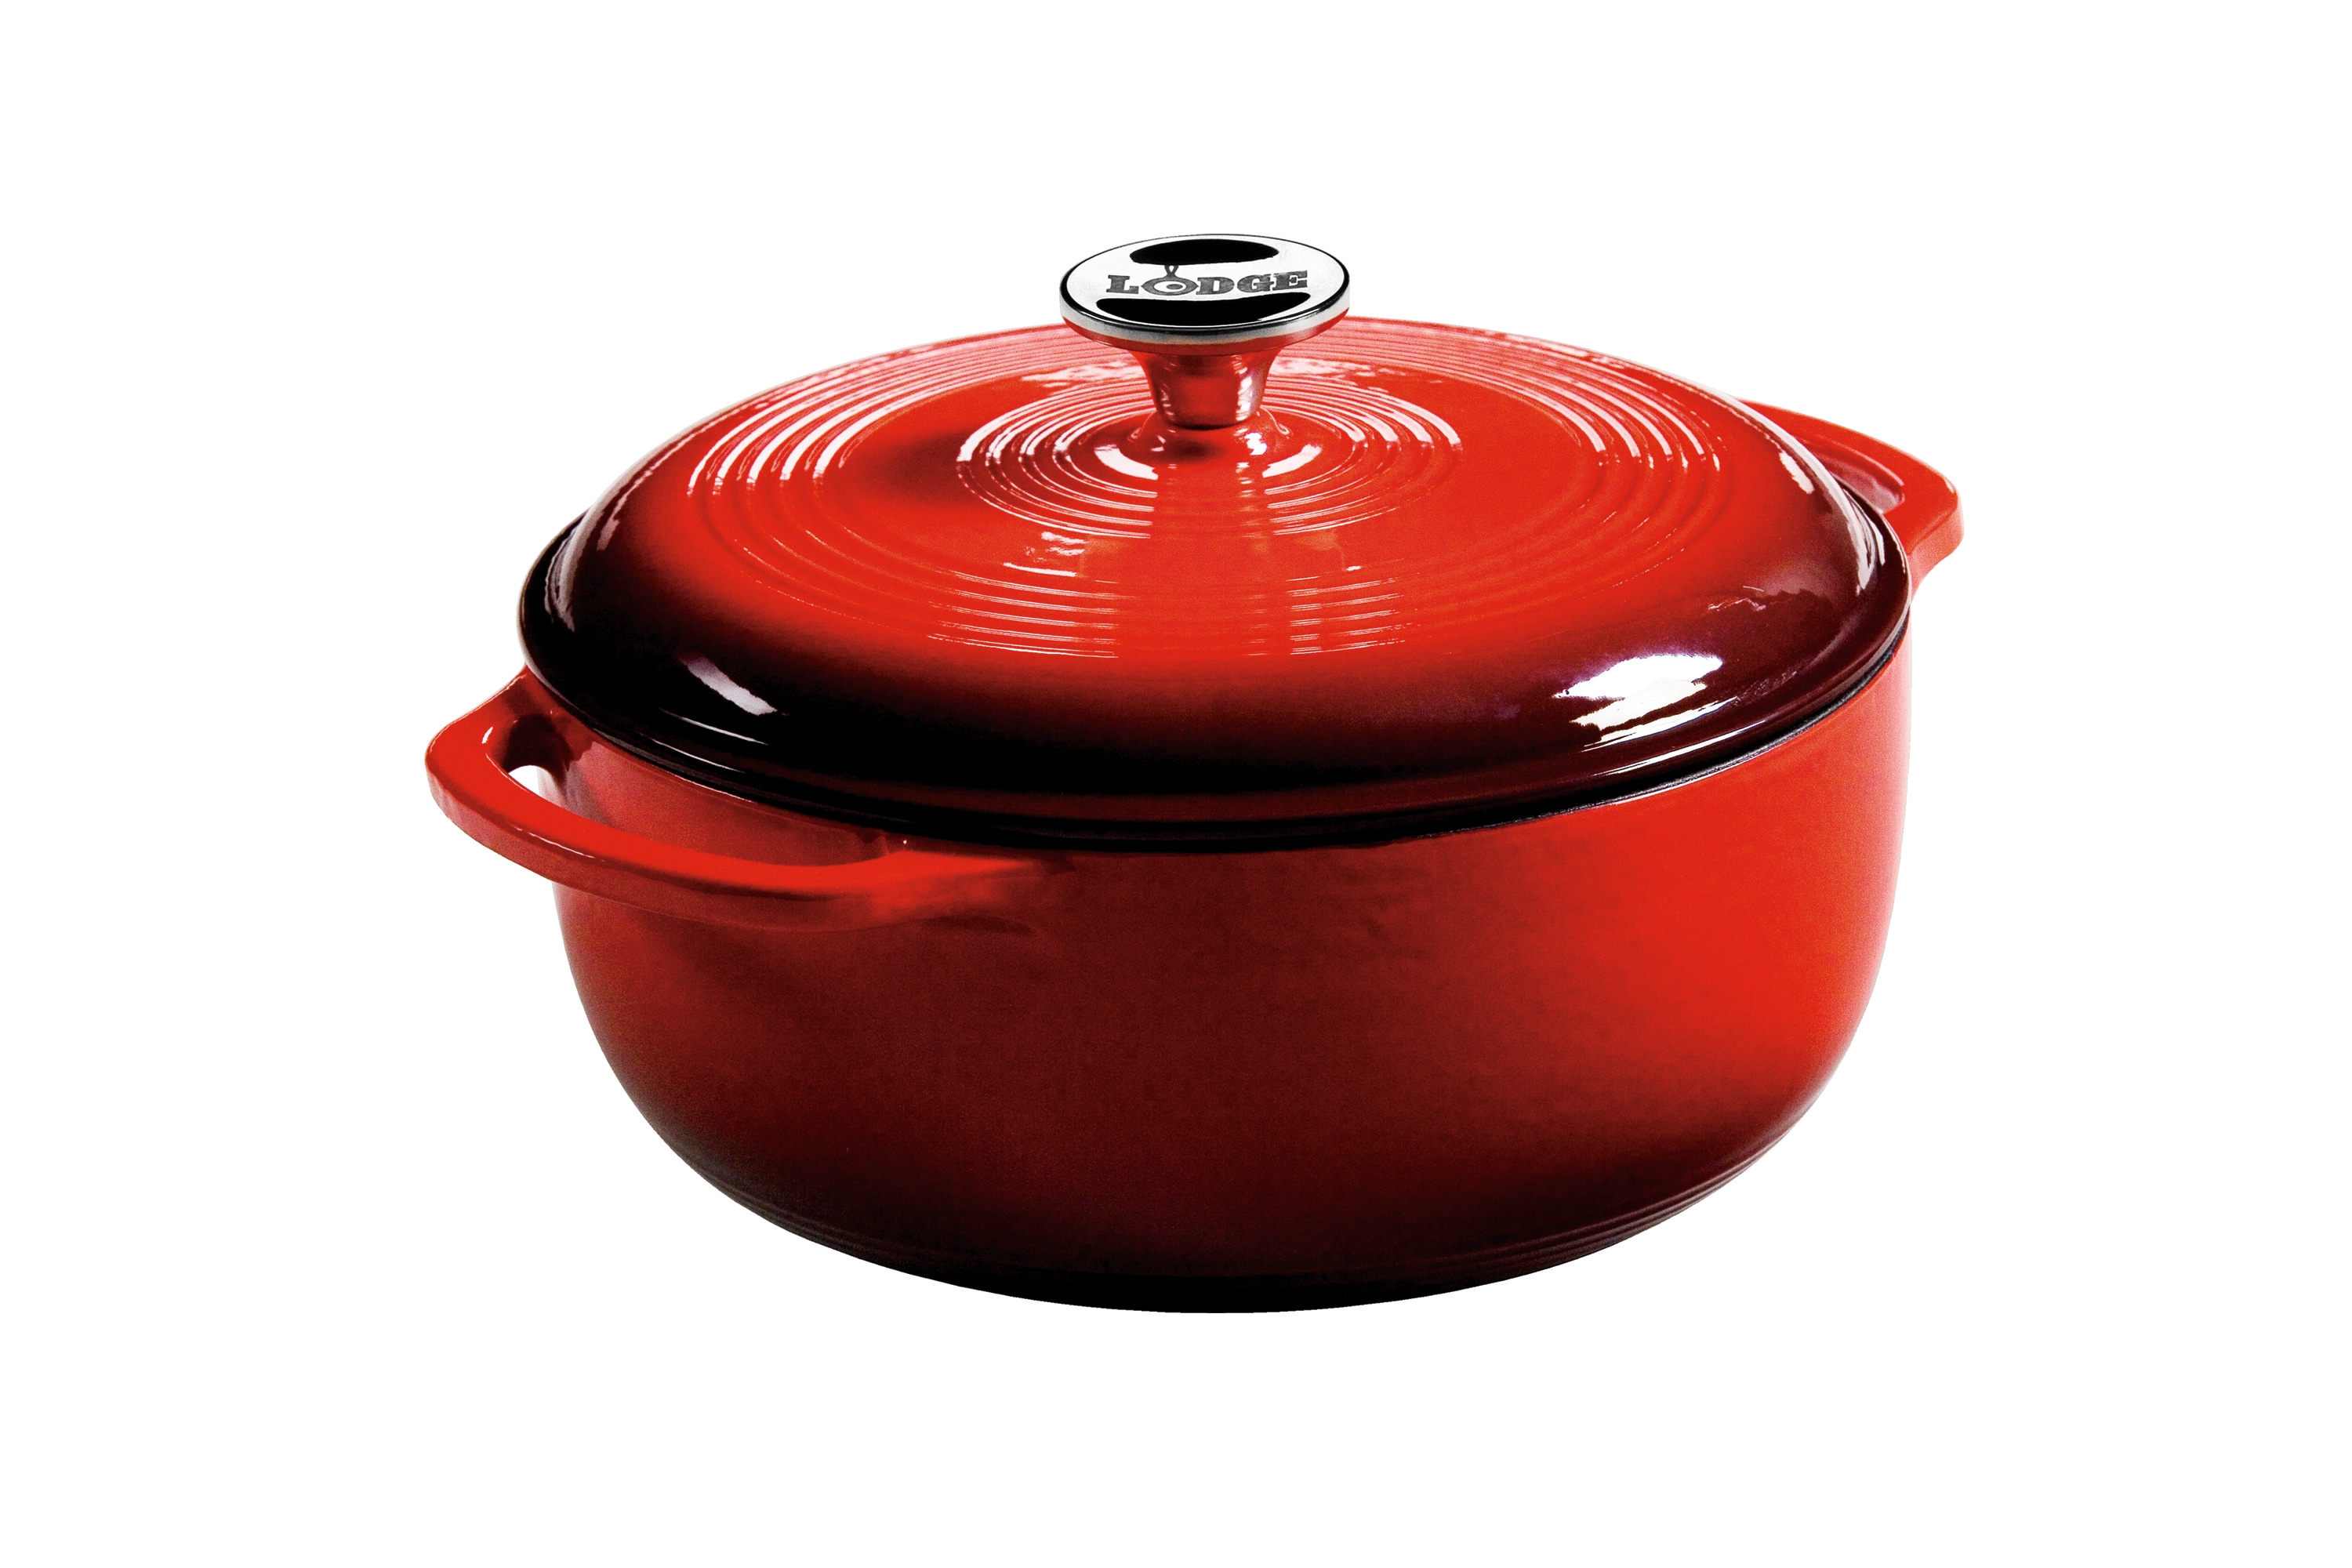 7 Quart Lodge Red Enameled Cast Iron Double Dutch Oven Grill Pan for sale  online